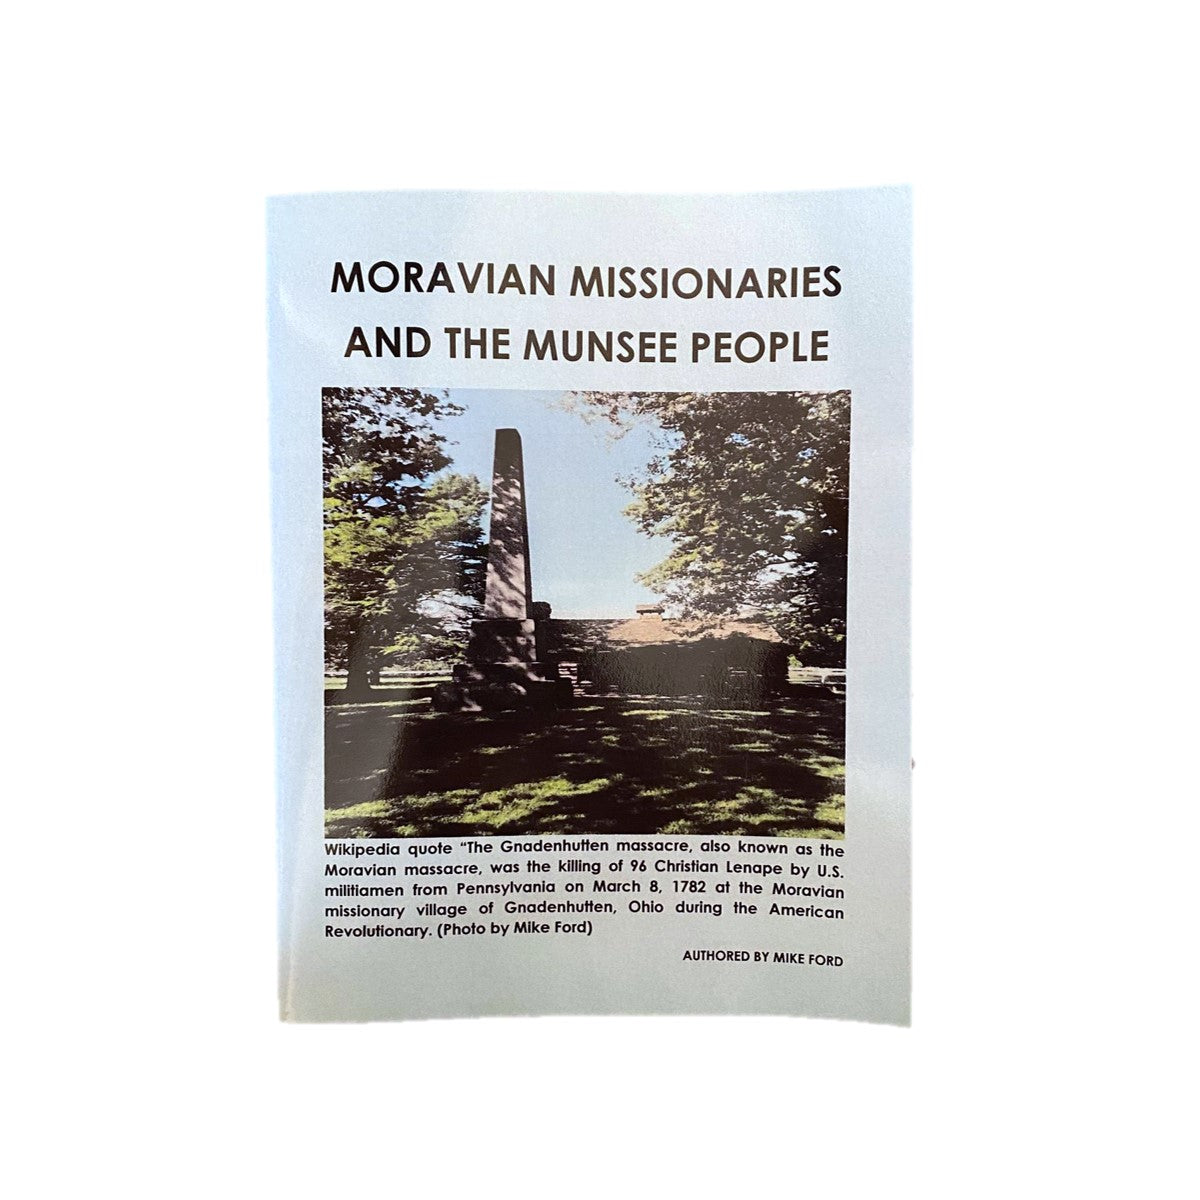 Munsee - Moravian Missionaries and the Munsee People